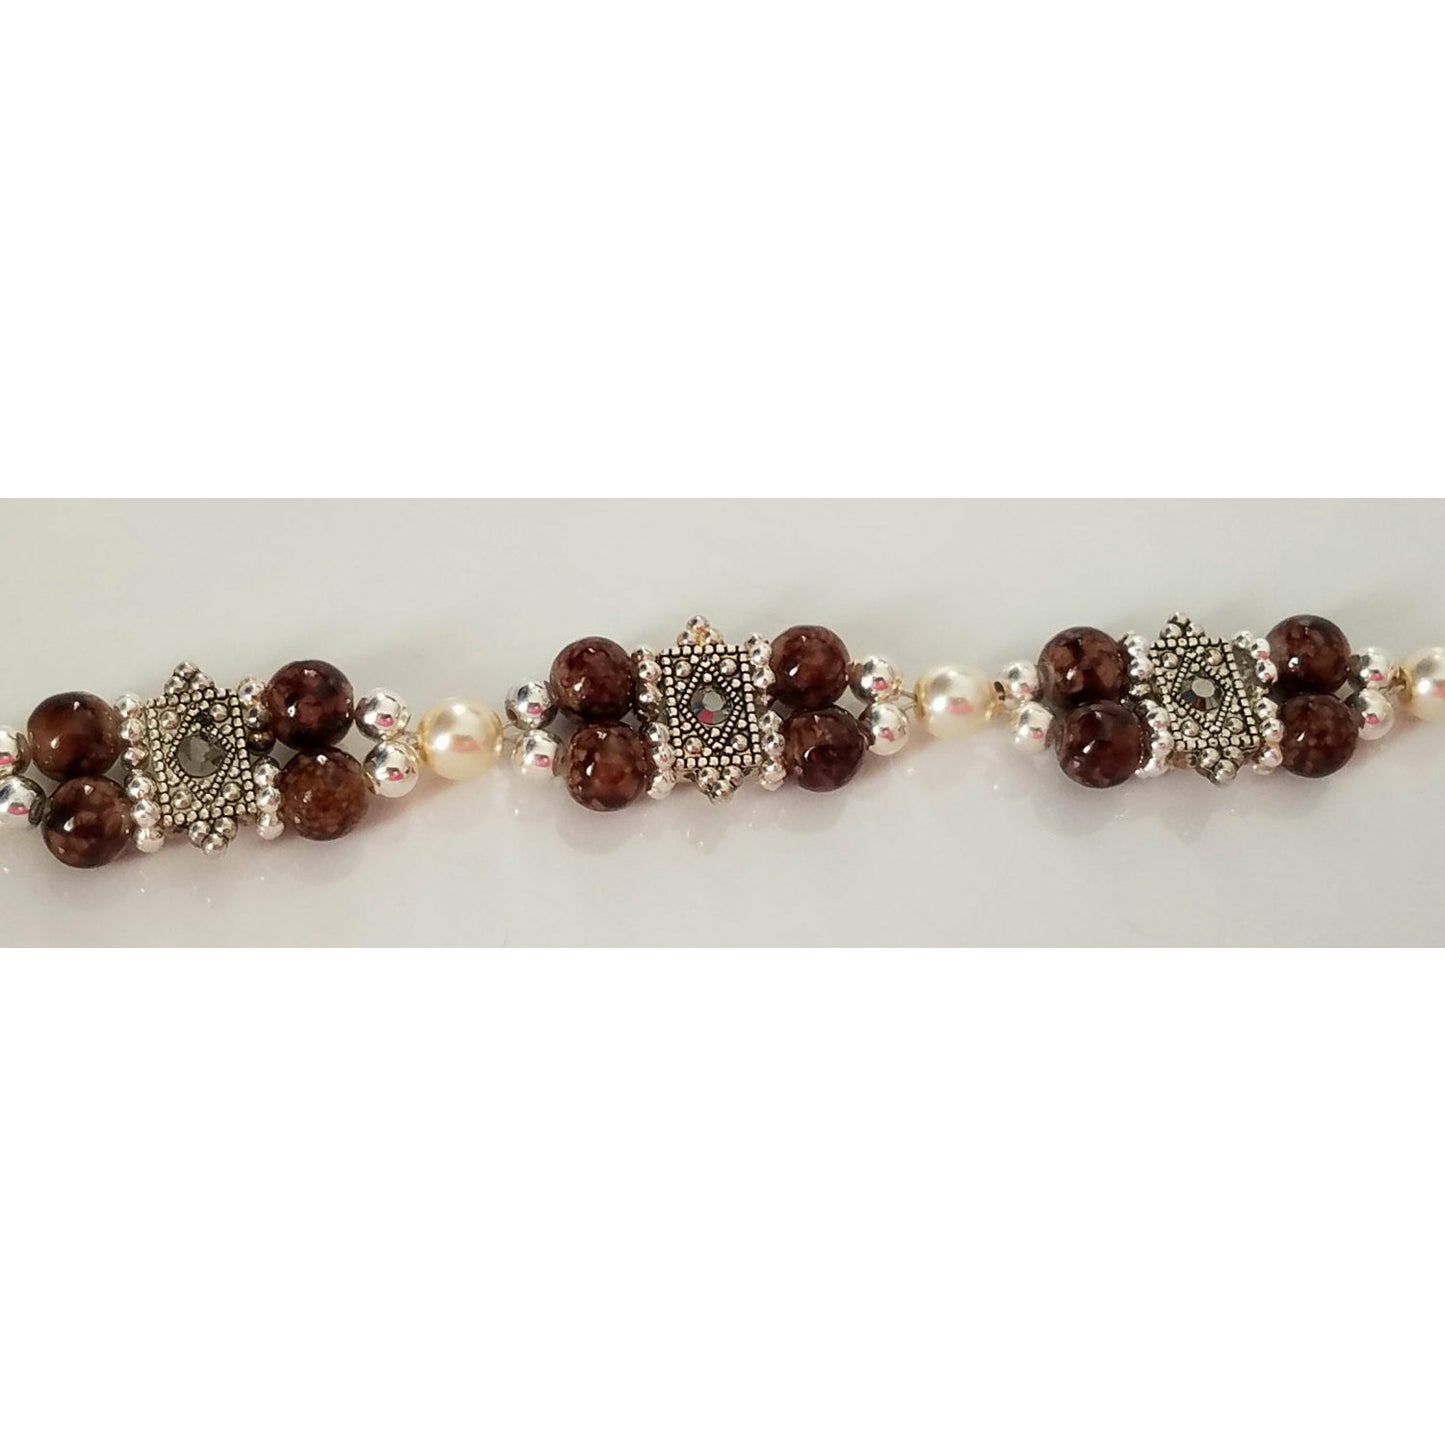 Chocolate Moss Vintage style bracelet and matching earrings